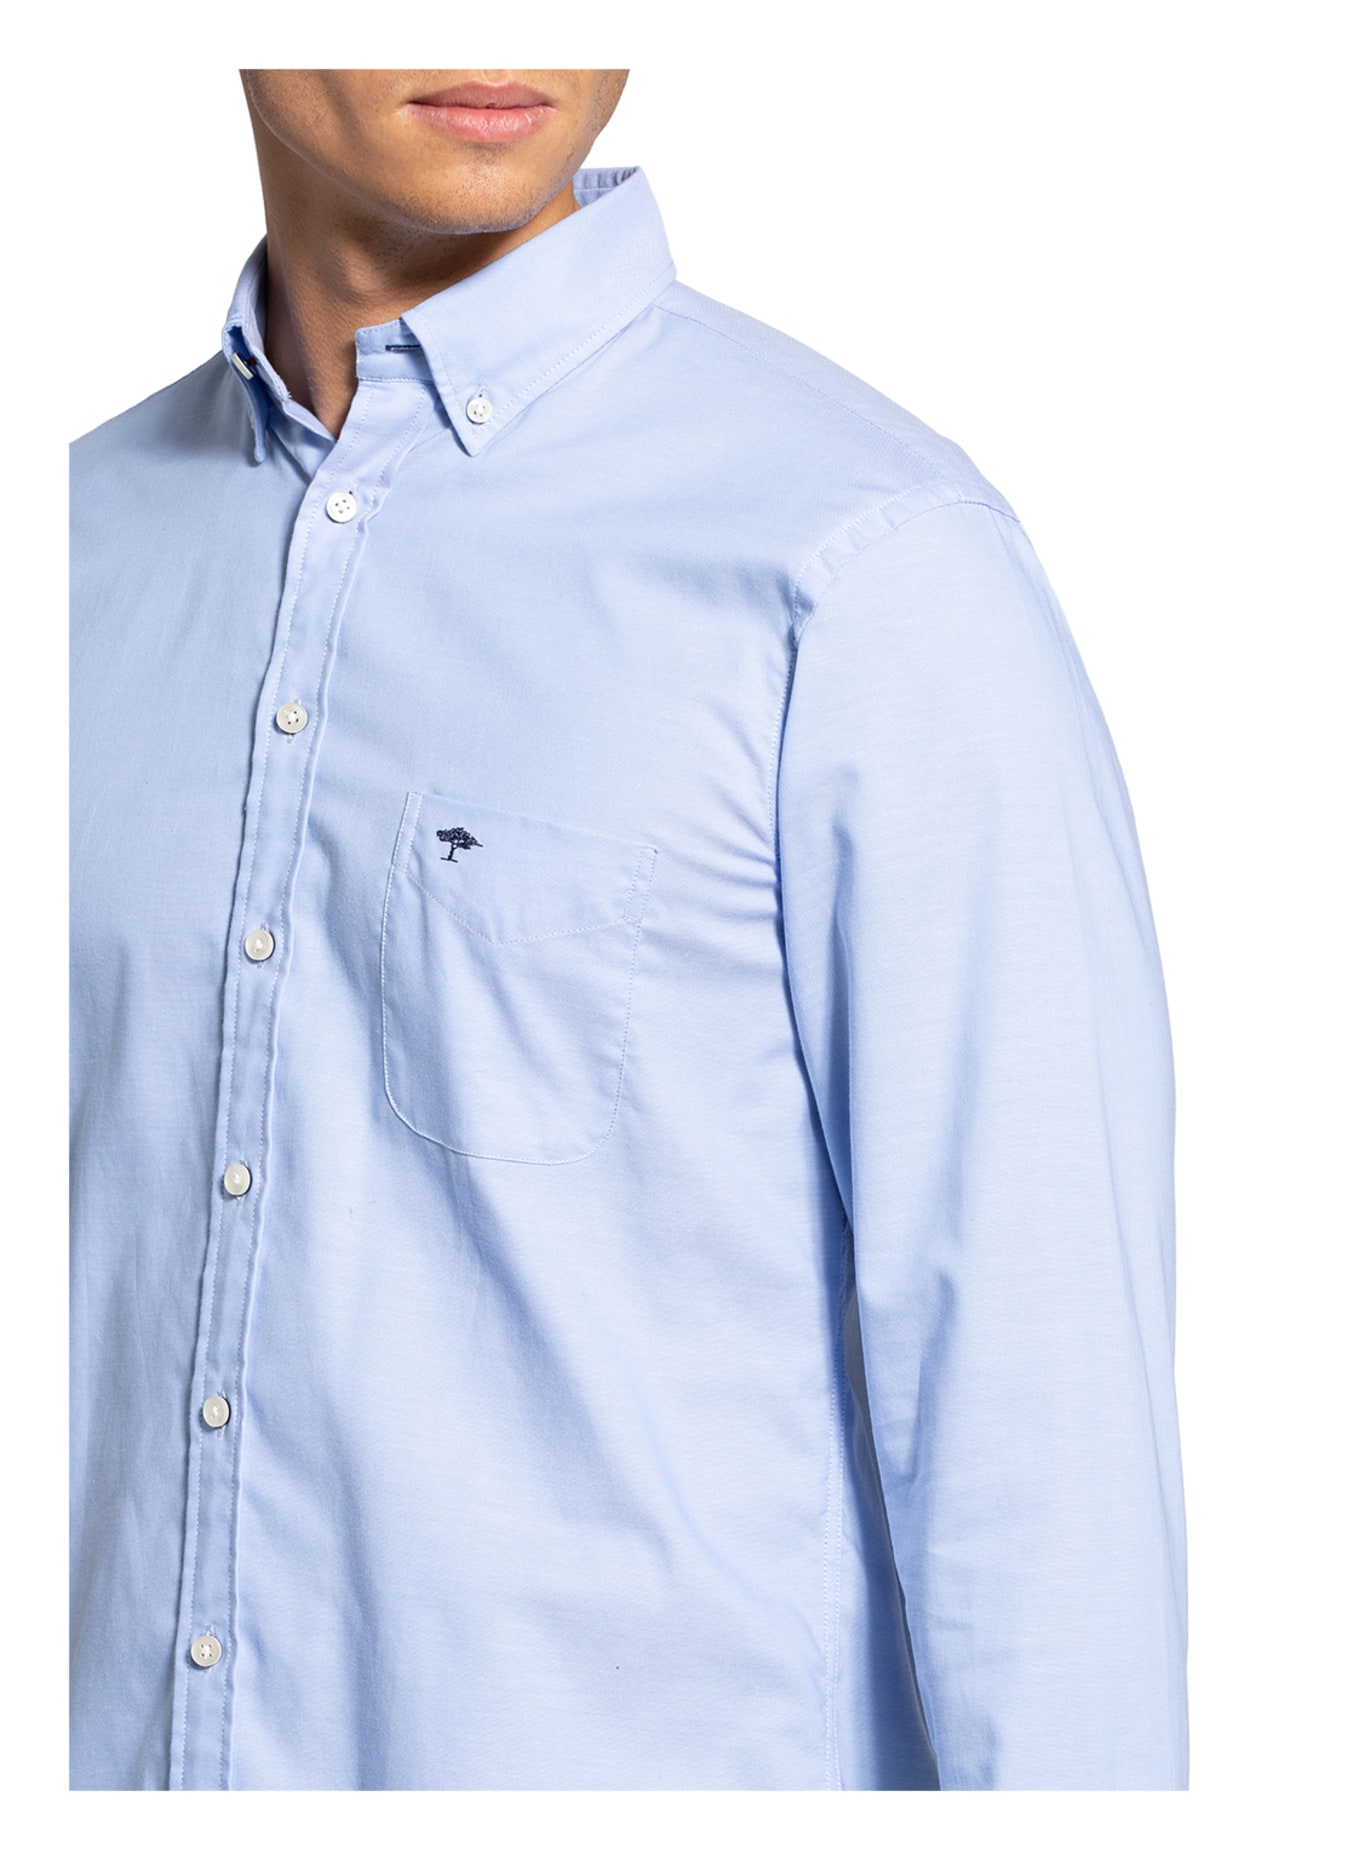 FYNCH-HATTON Shirt casual fit in light blue